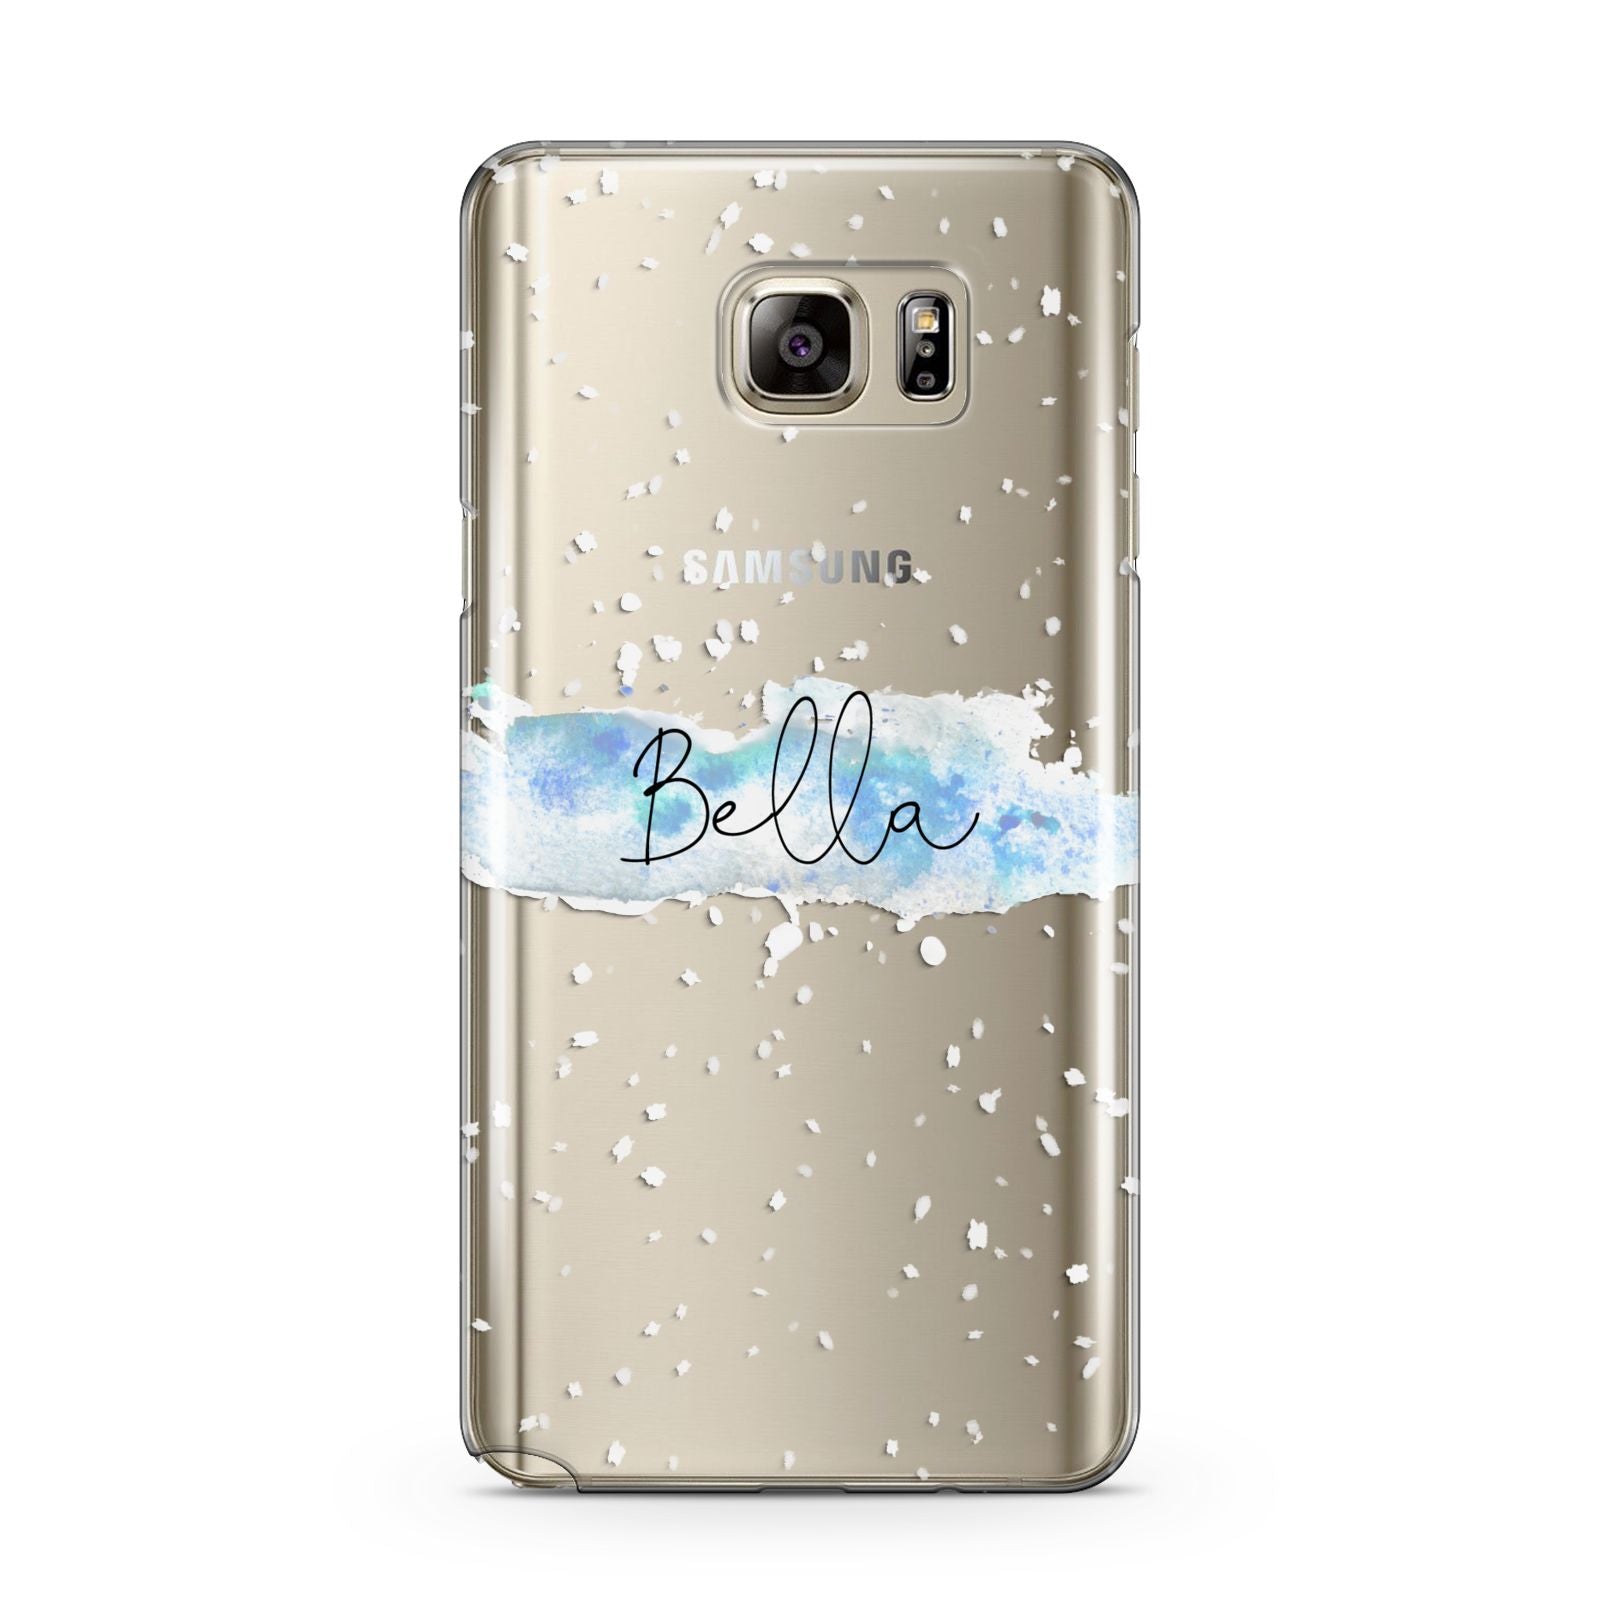 Personalised Christmas Snow fall Samsung Galaxy Note 5 Case